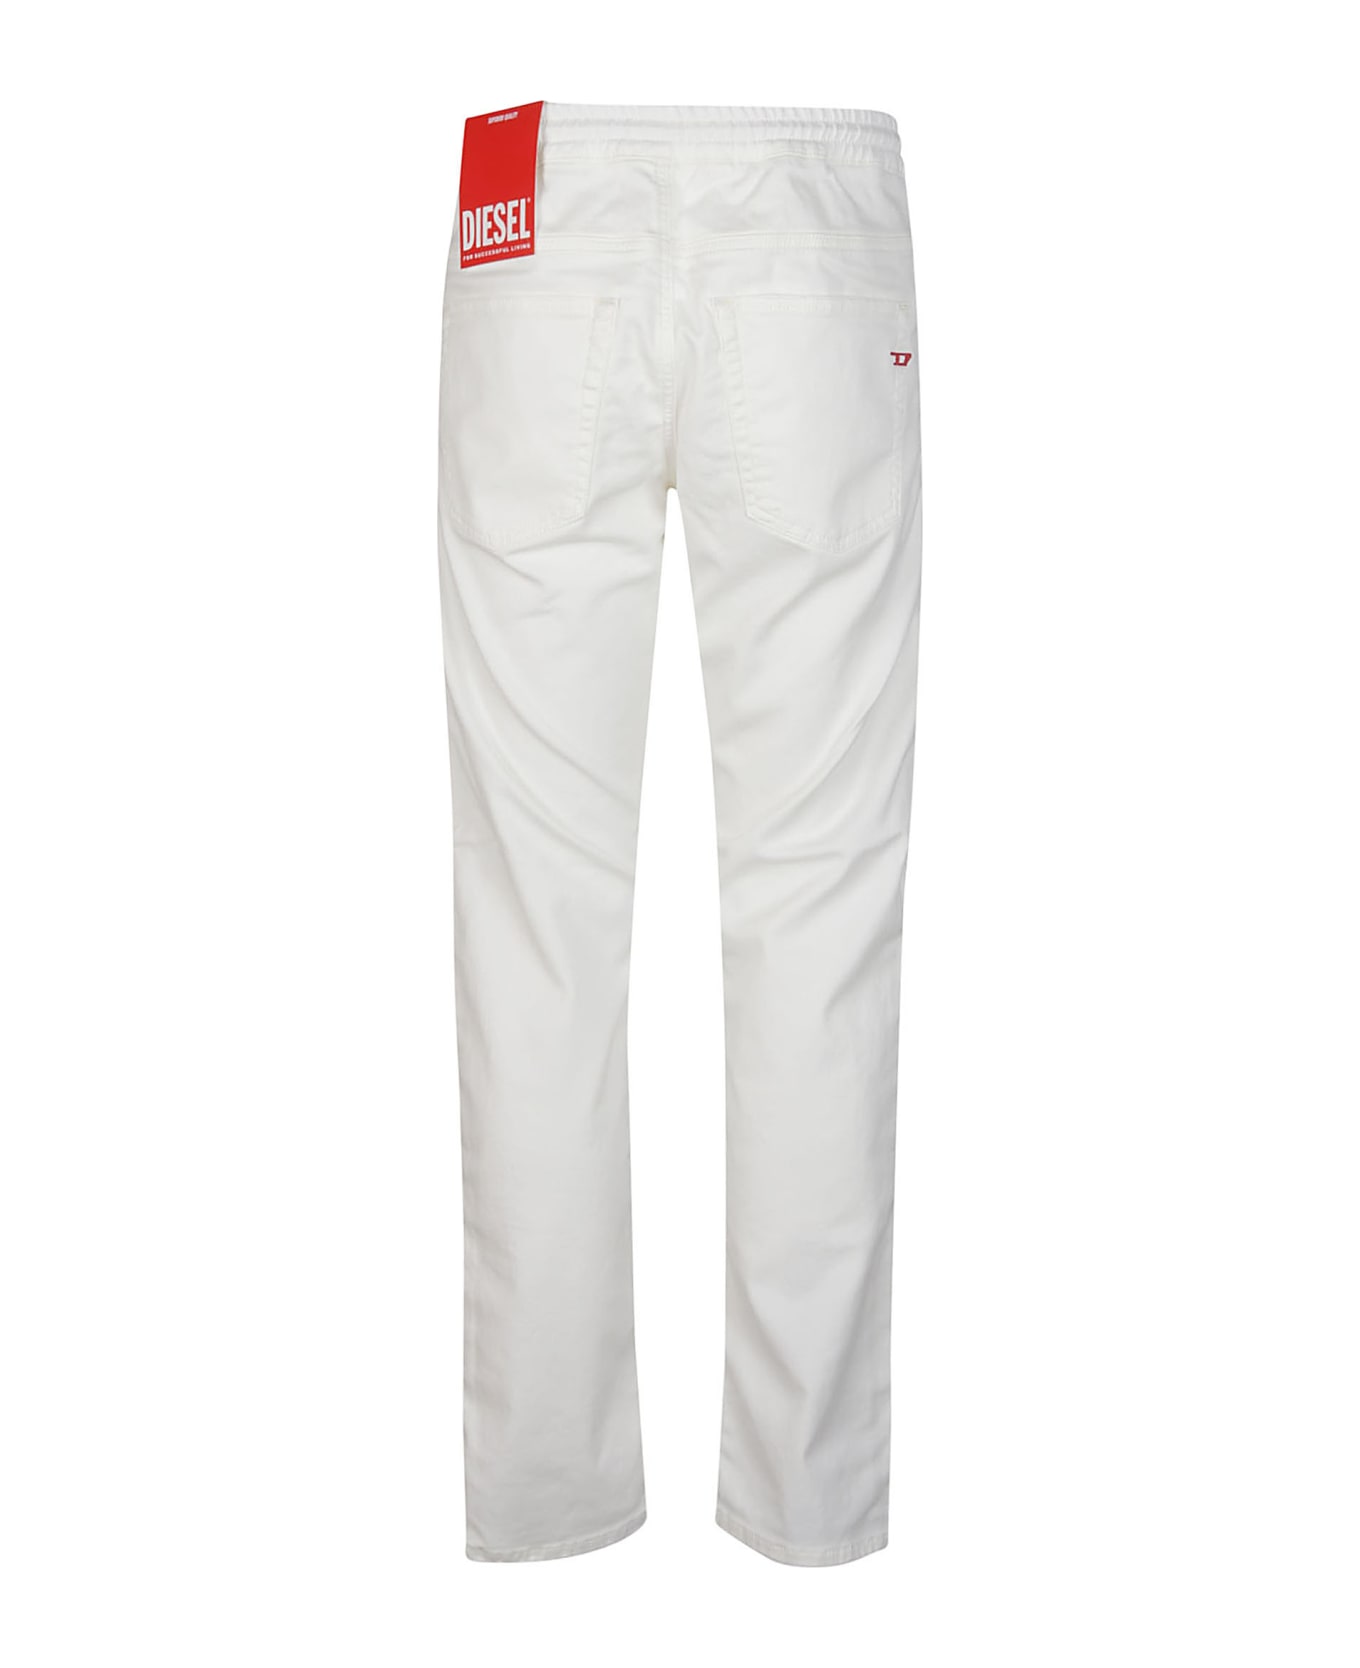 Diesel 2030 D-krooley Jogg Sweat Jeans - White ボトムス